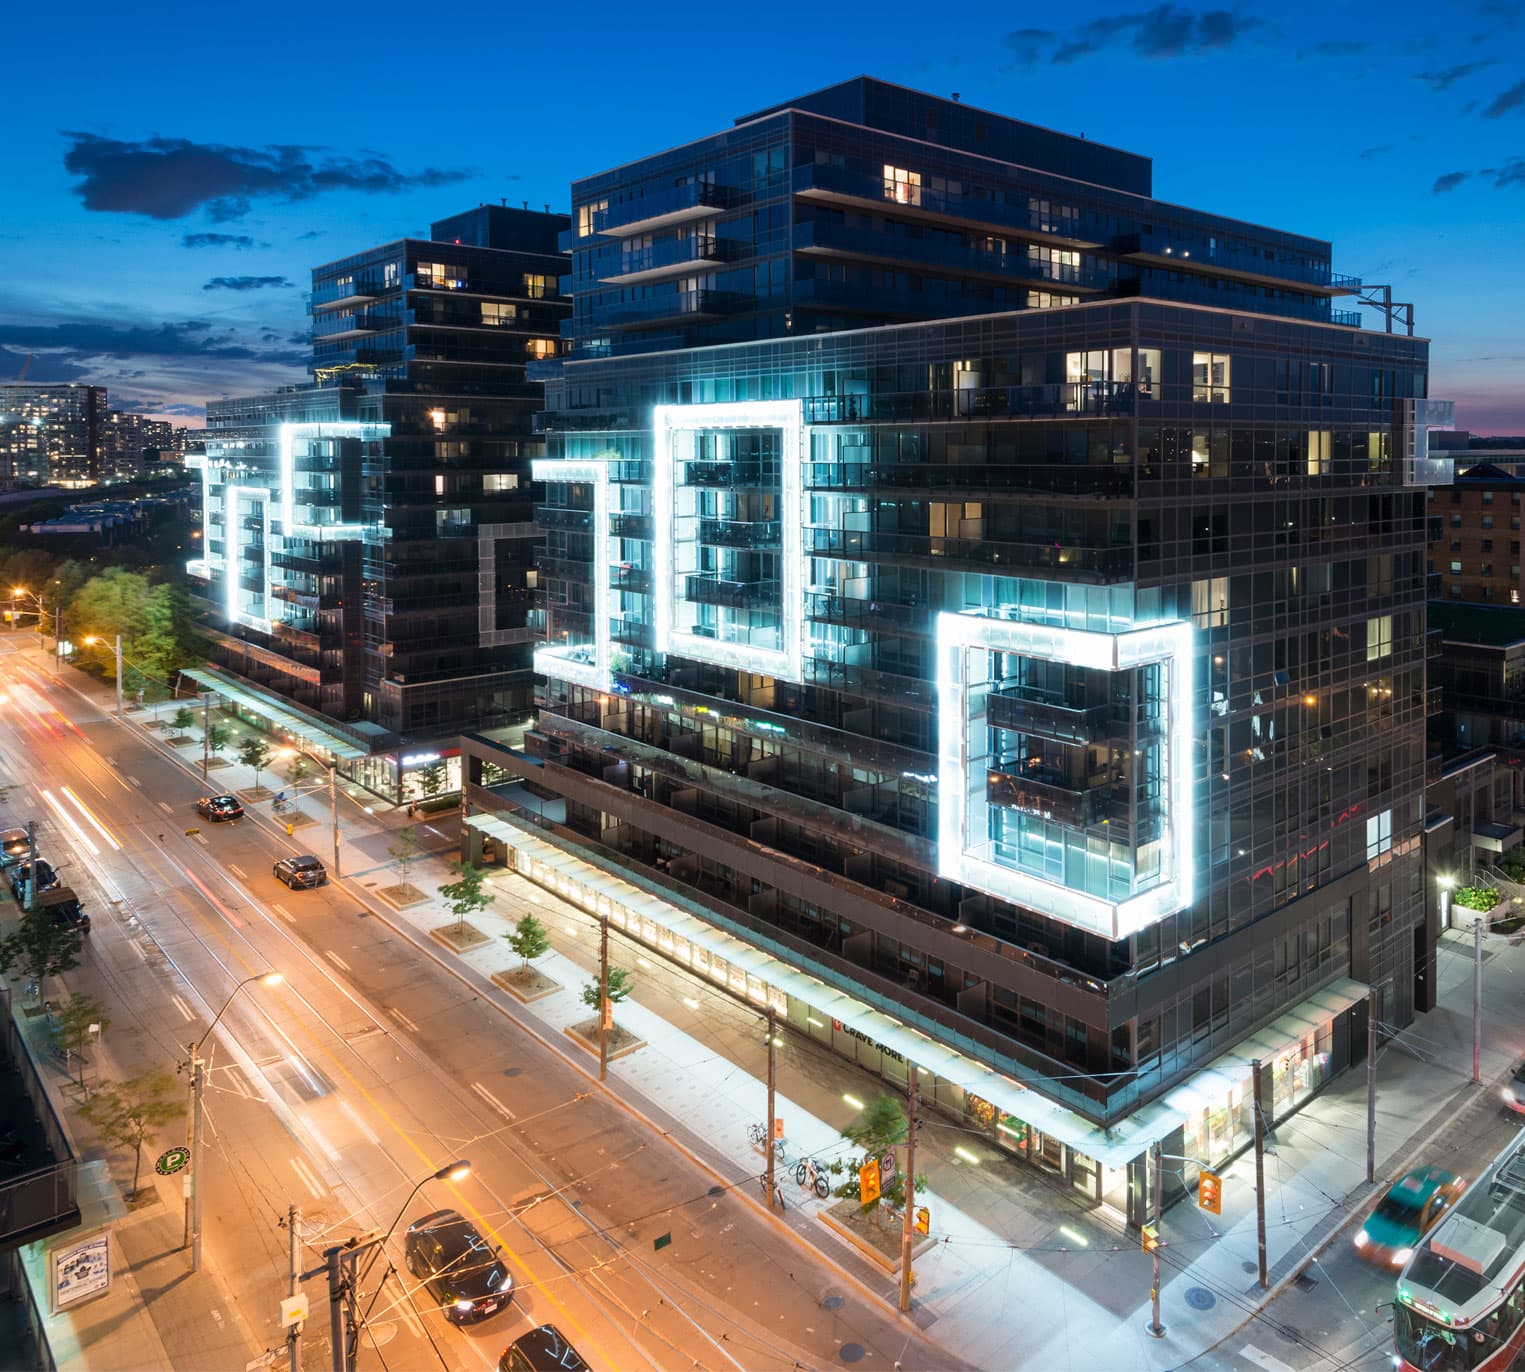 LEASED: 1030 King Ste West. DNA Condos